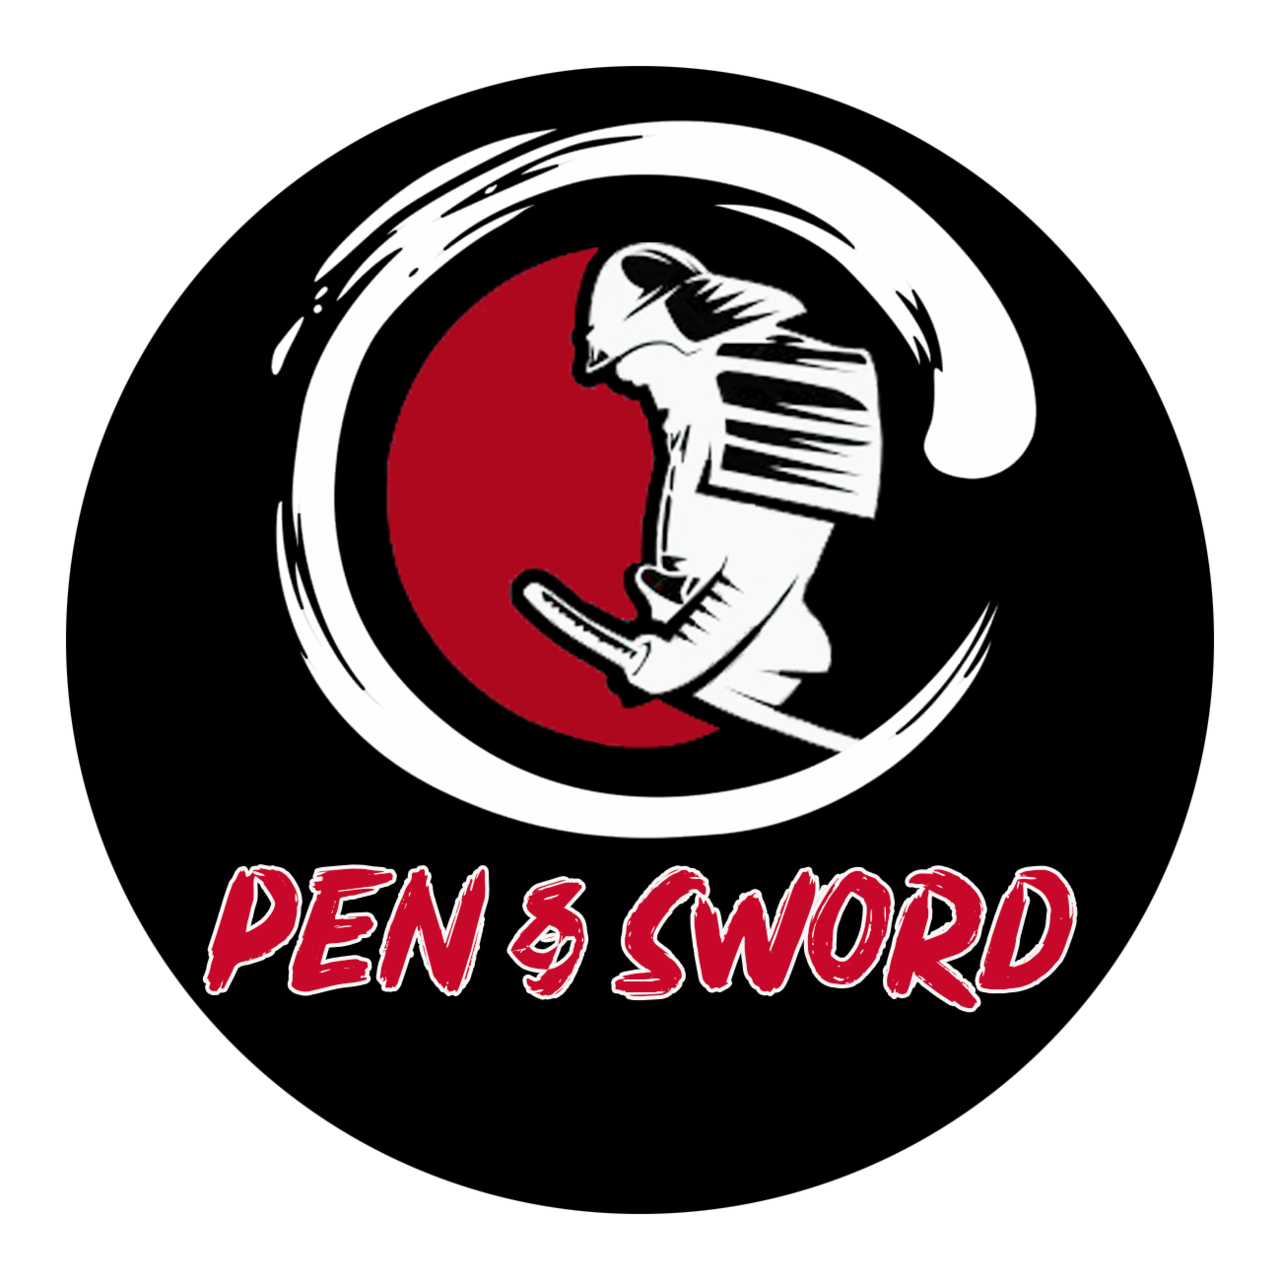 Artwork for The Pen and Sword Journal